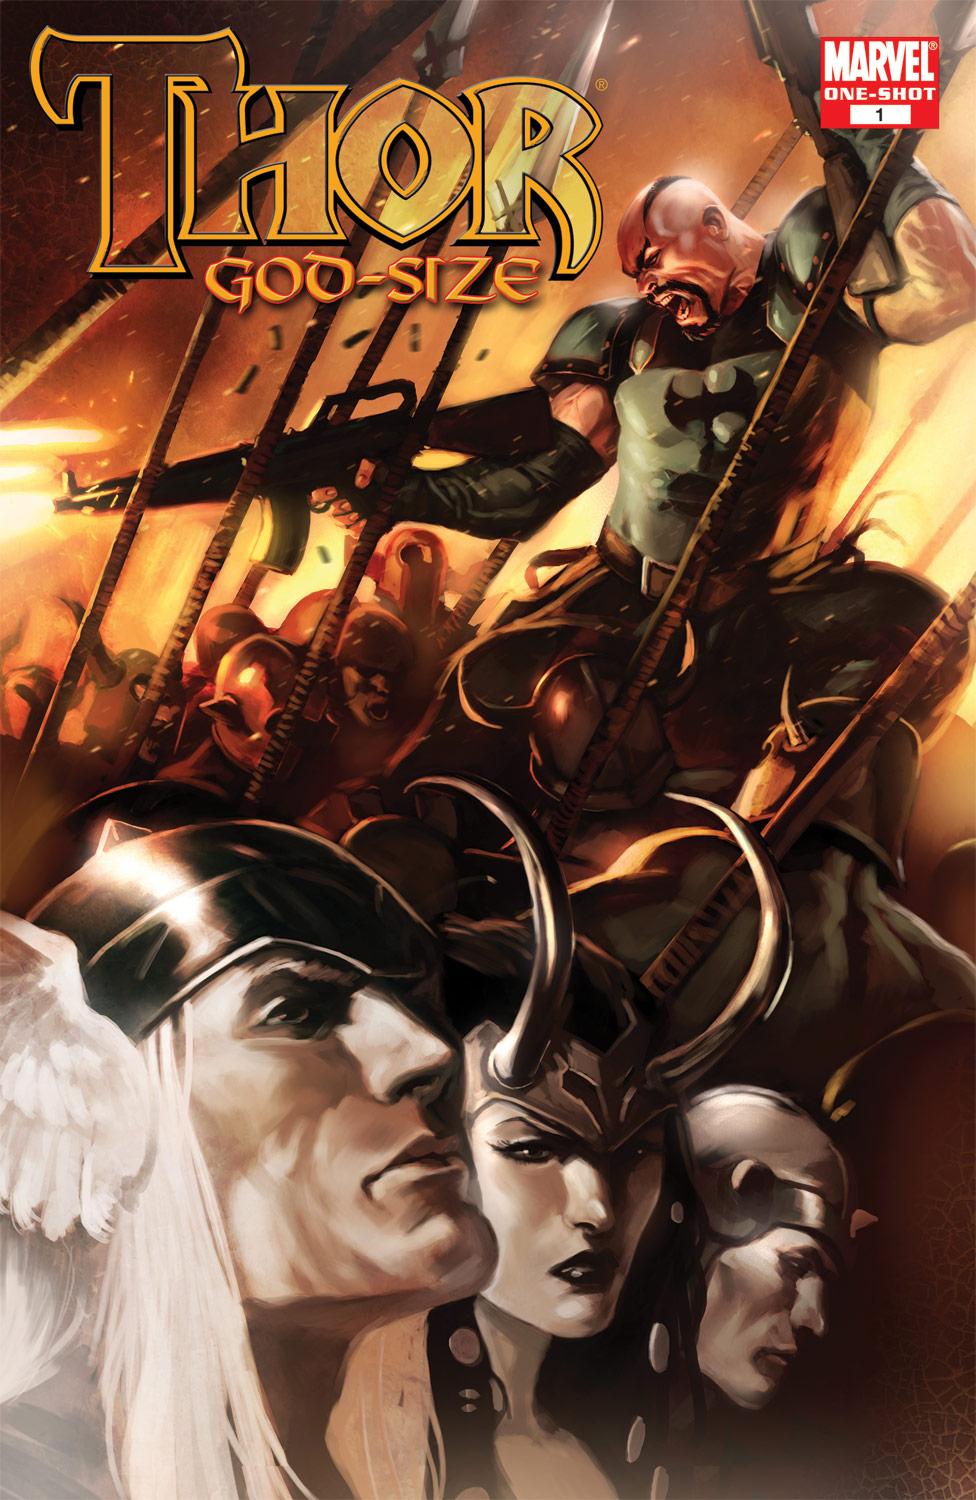 Thor God-Size Special (2008) #1